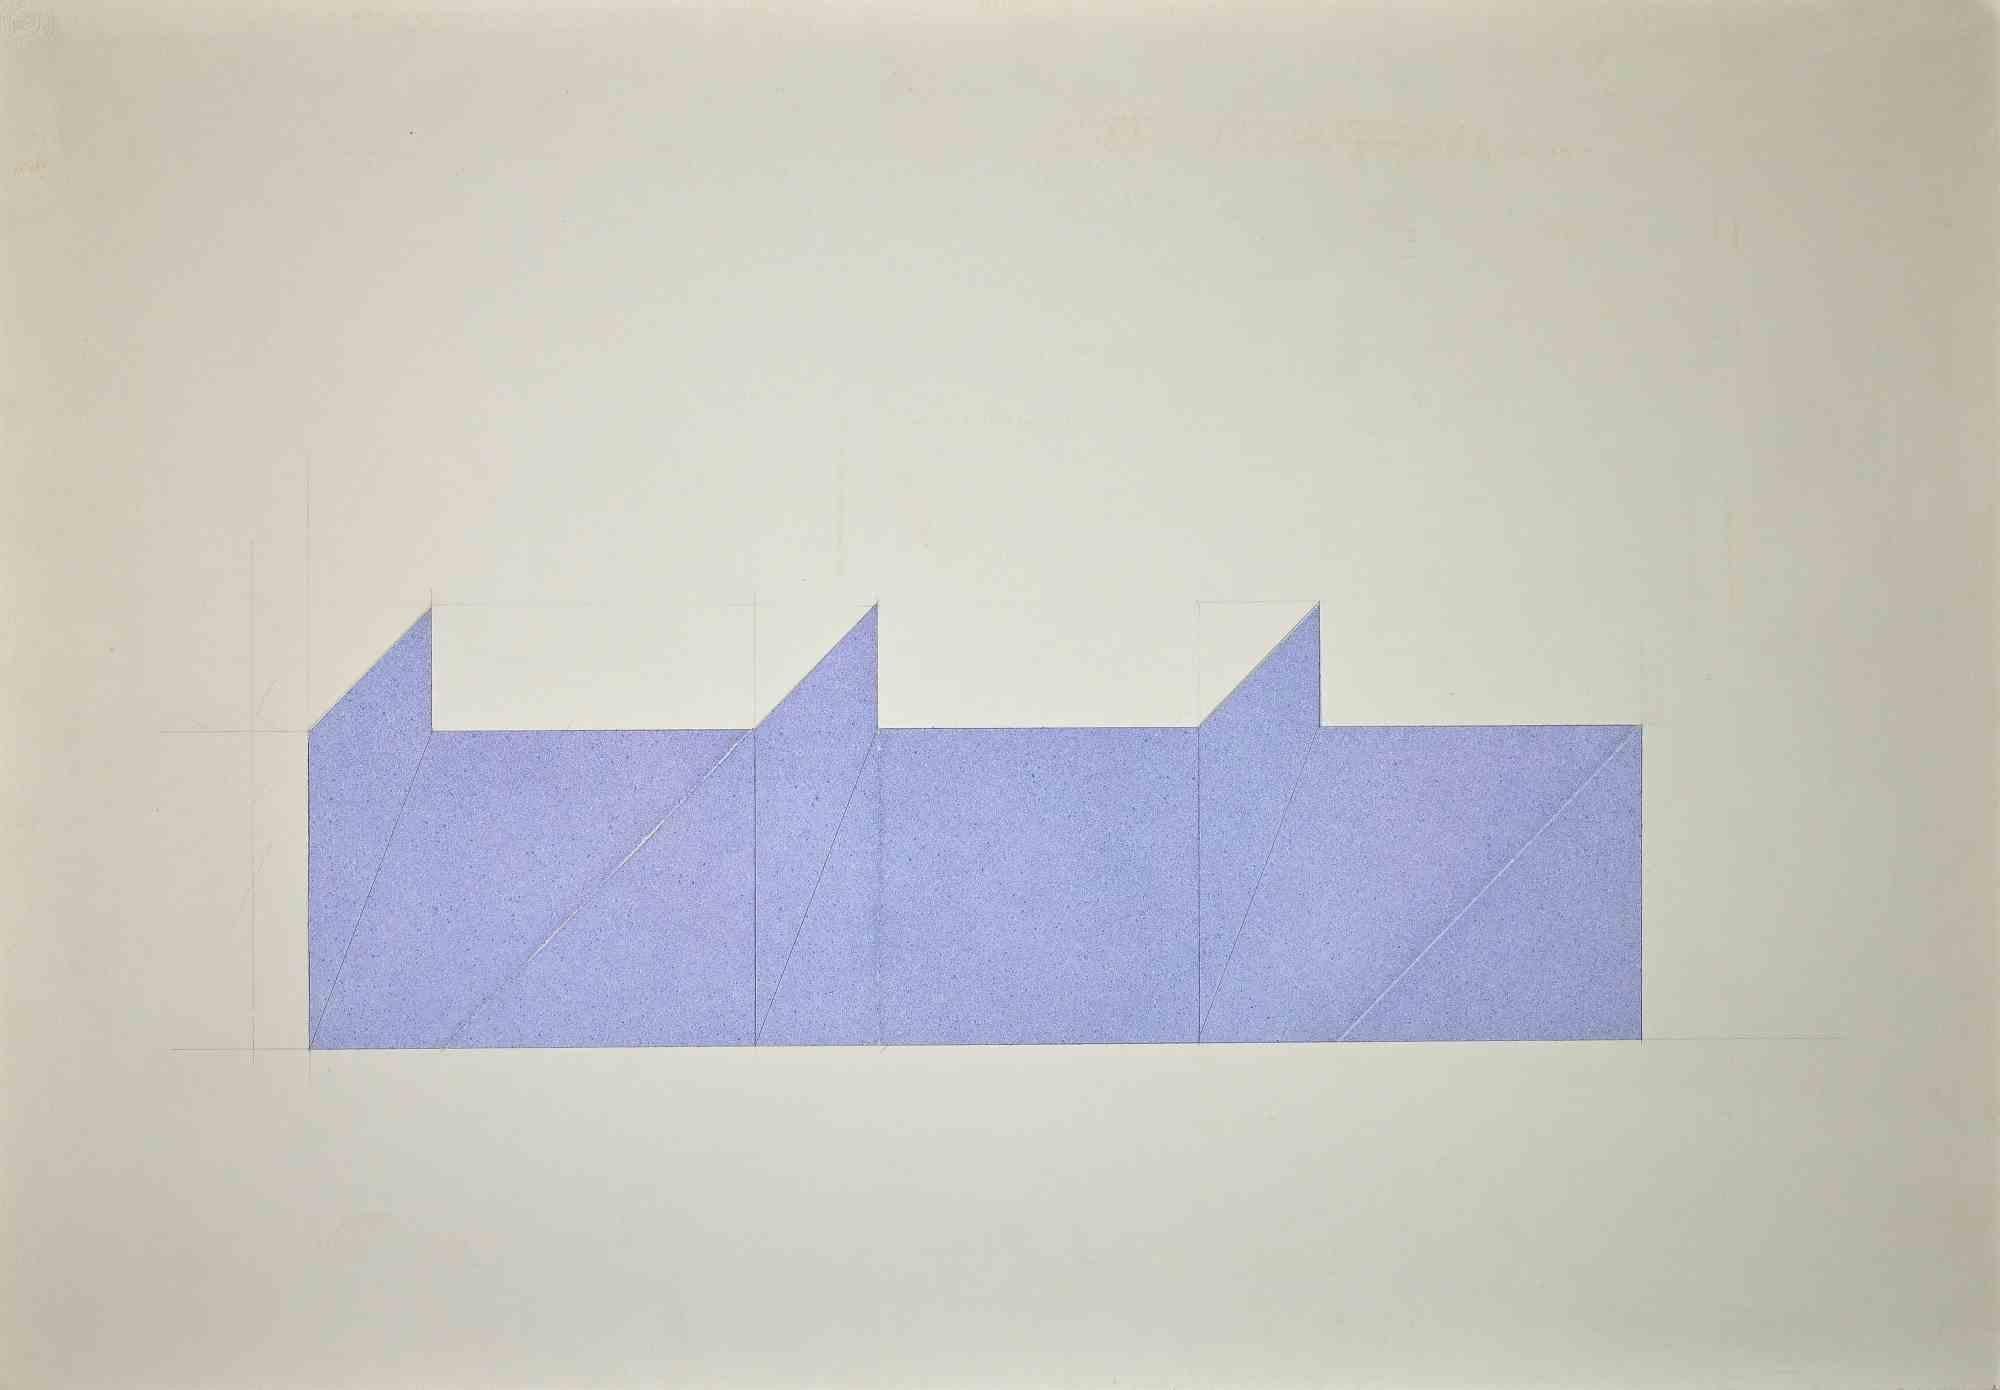 Abstract geometrical Scene is an original artwork realized by Rodolfo Aricò  (Milan, 3 June 1930 – 22 June 2002) in the 1970s. 

Colored lilac film on cardboard with pencil outlines. The dry stamp is present on the upper left corner. Not signed nor